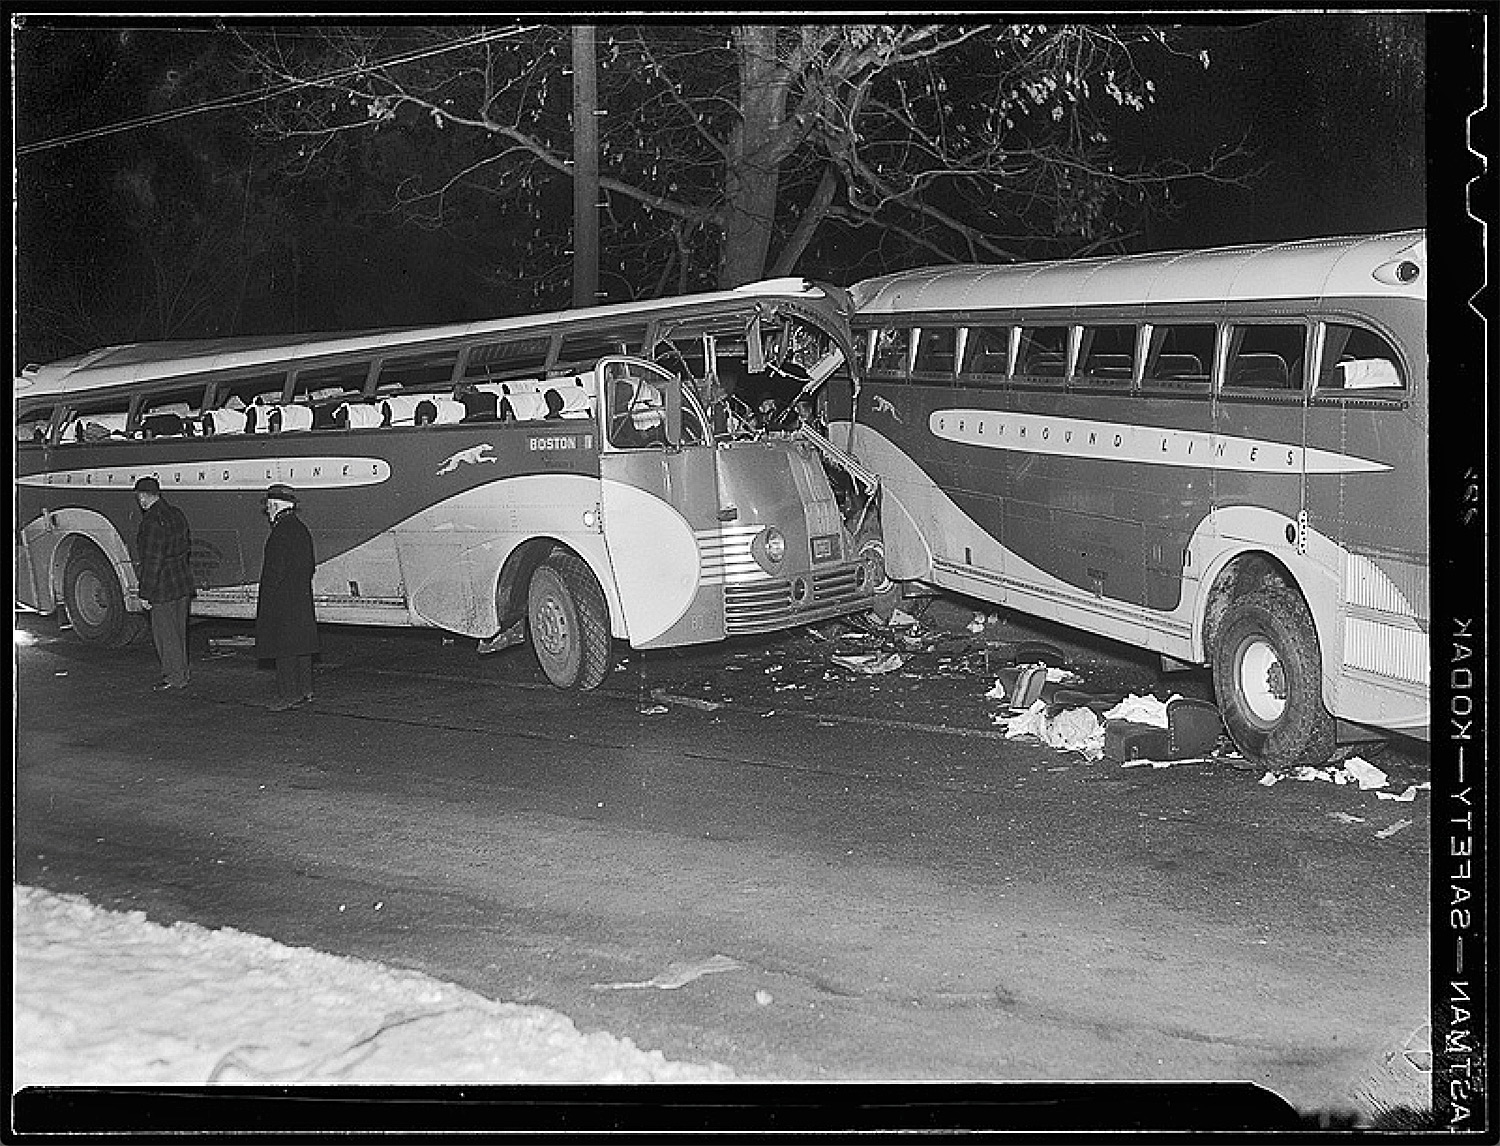 Two Greyhound buses collide. What the chance of this?